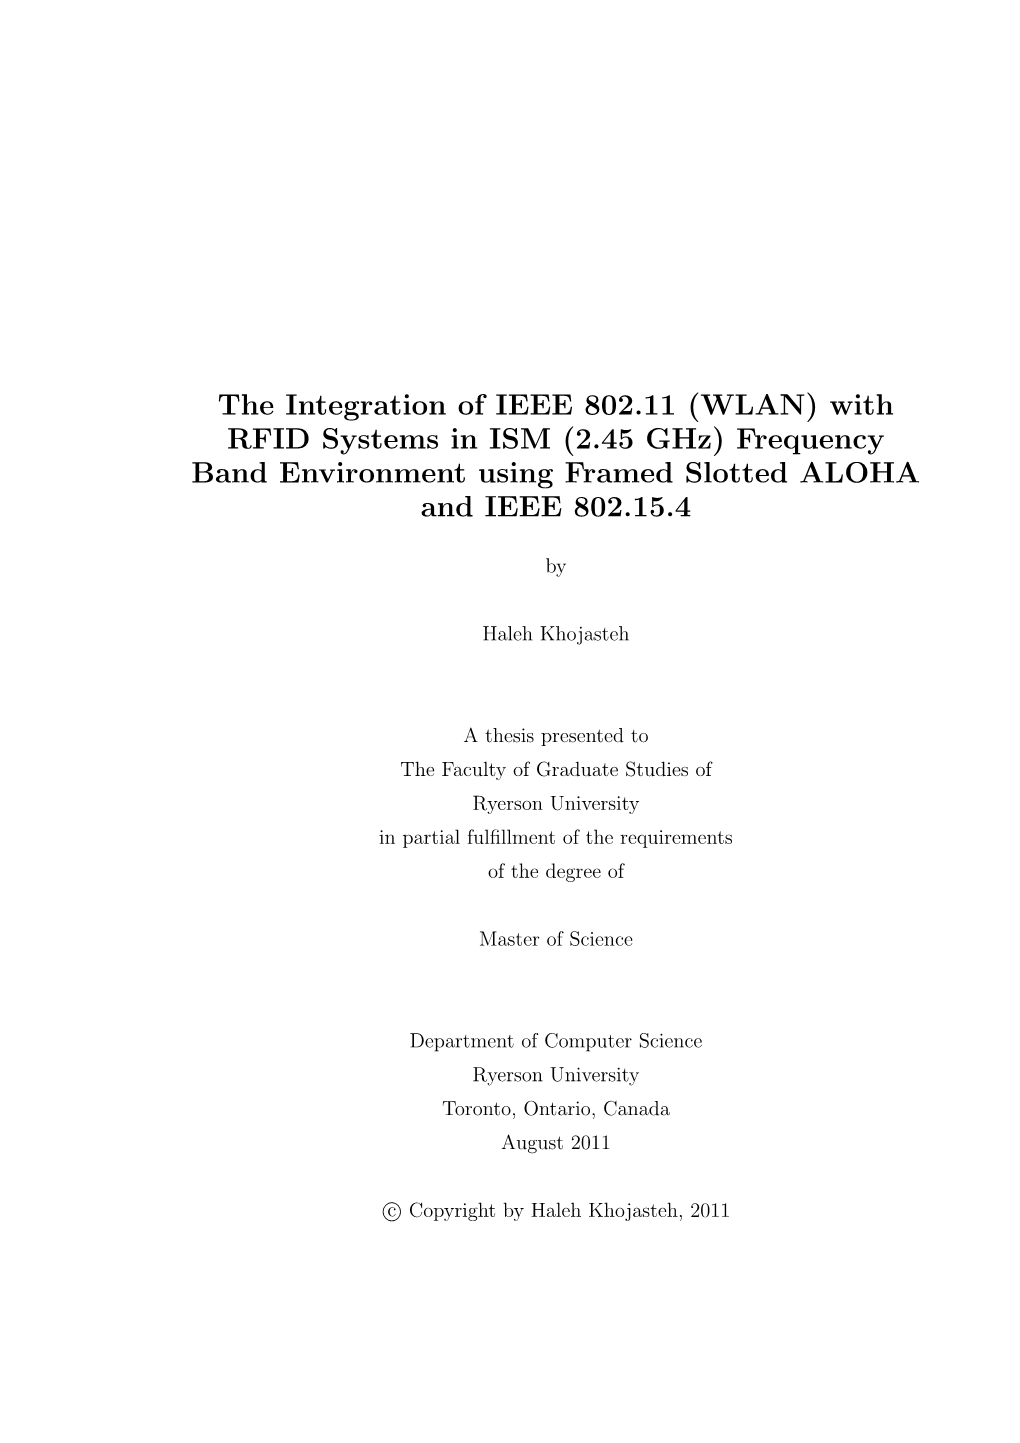 The Integration of IEEE 802.11 (WLAN) with RFID Systems in ISM (2.45 Ghz) Frequency Band Environment Using Framed Slotted ALOHA and IEEE 802.15.4